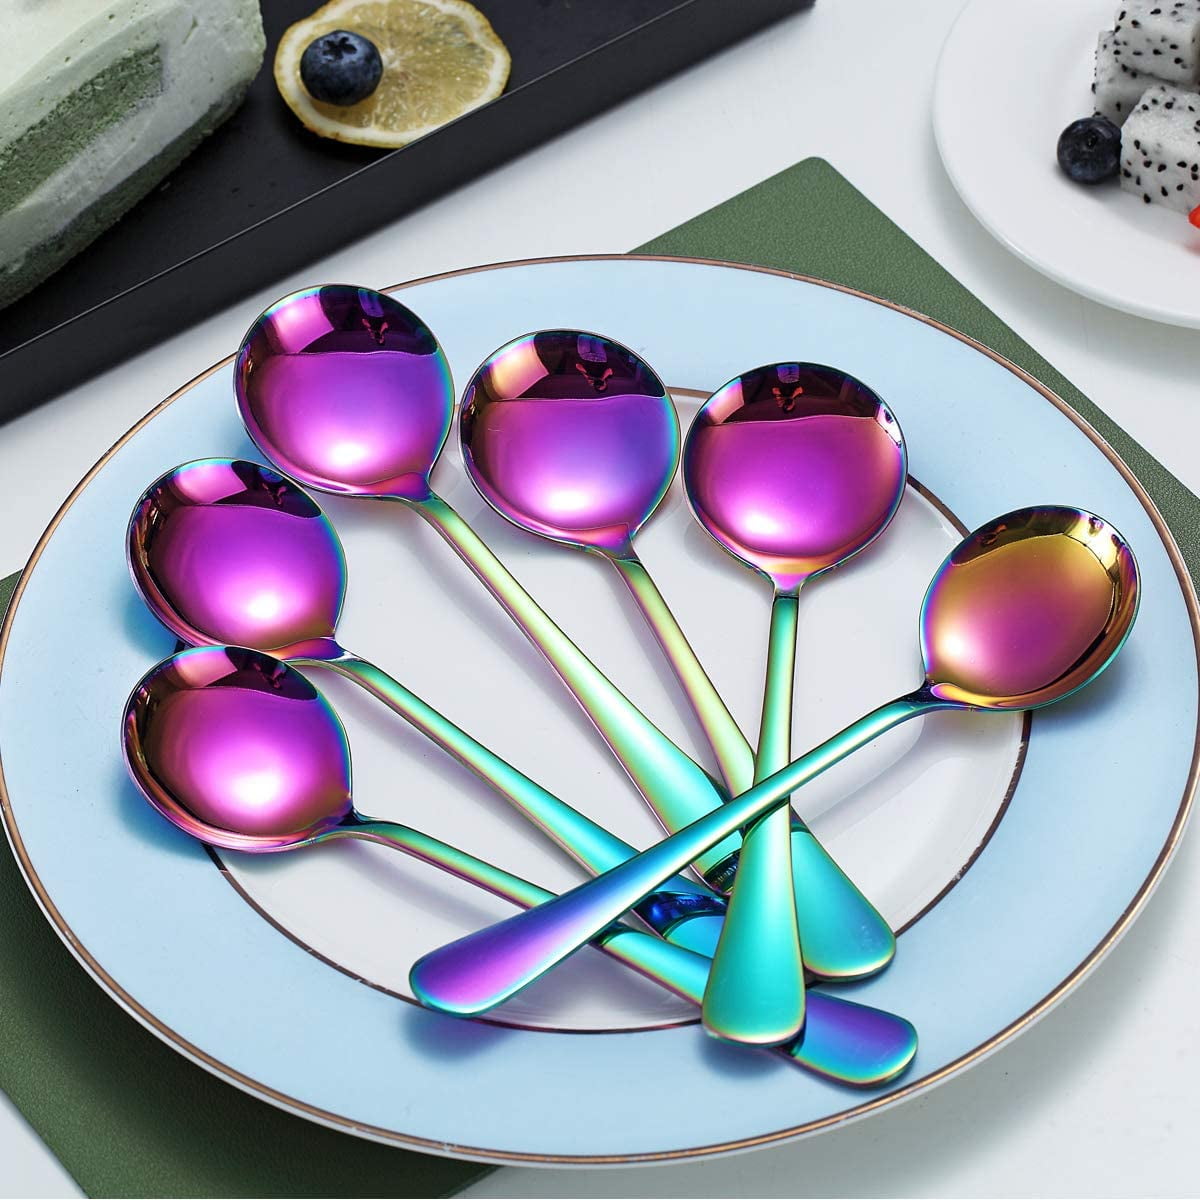 Mingyu mingyu colorful teaspoons silverware set of 12 - black 6-in small  spoons set, food grade stainless steel tea spoons shiny tit